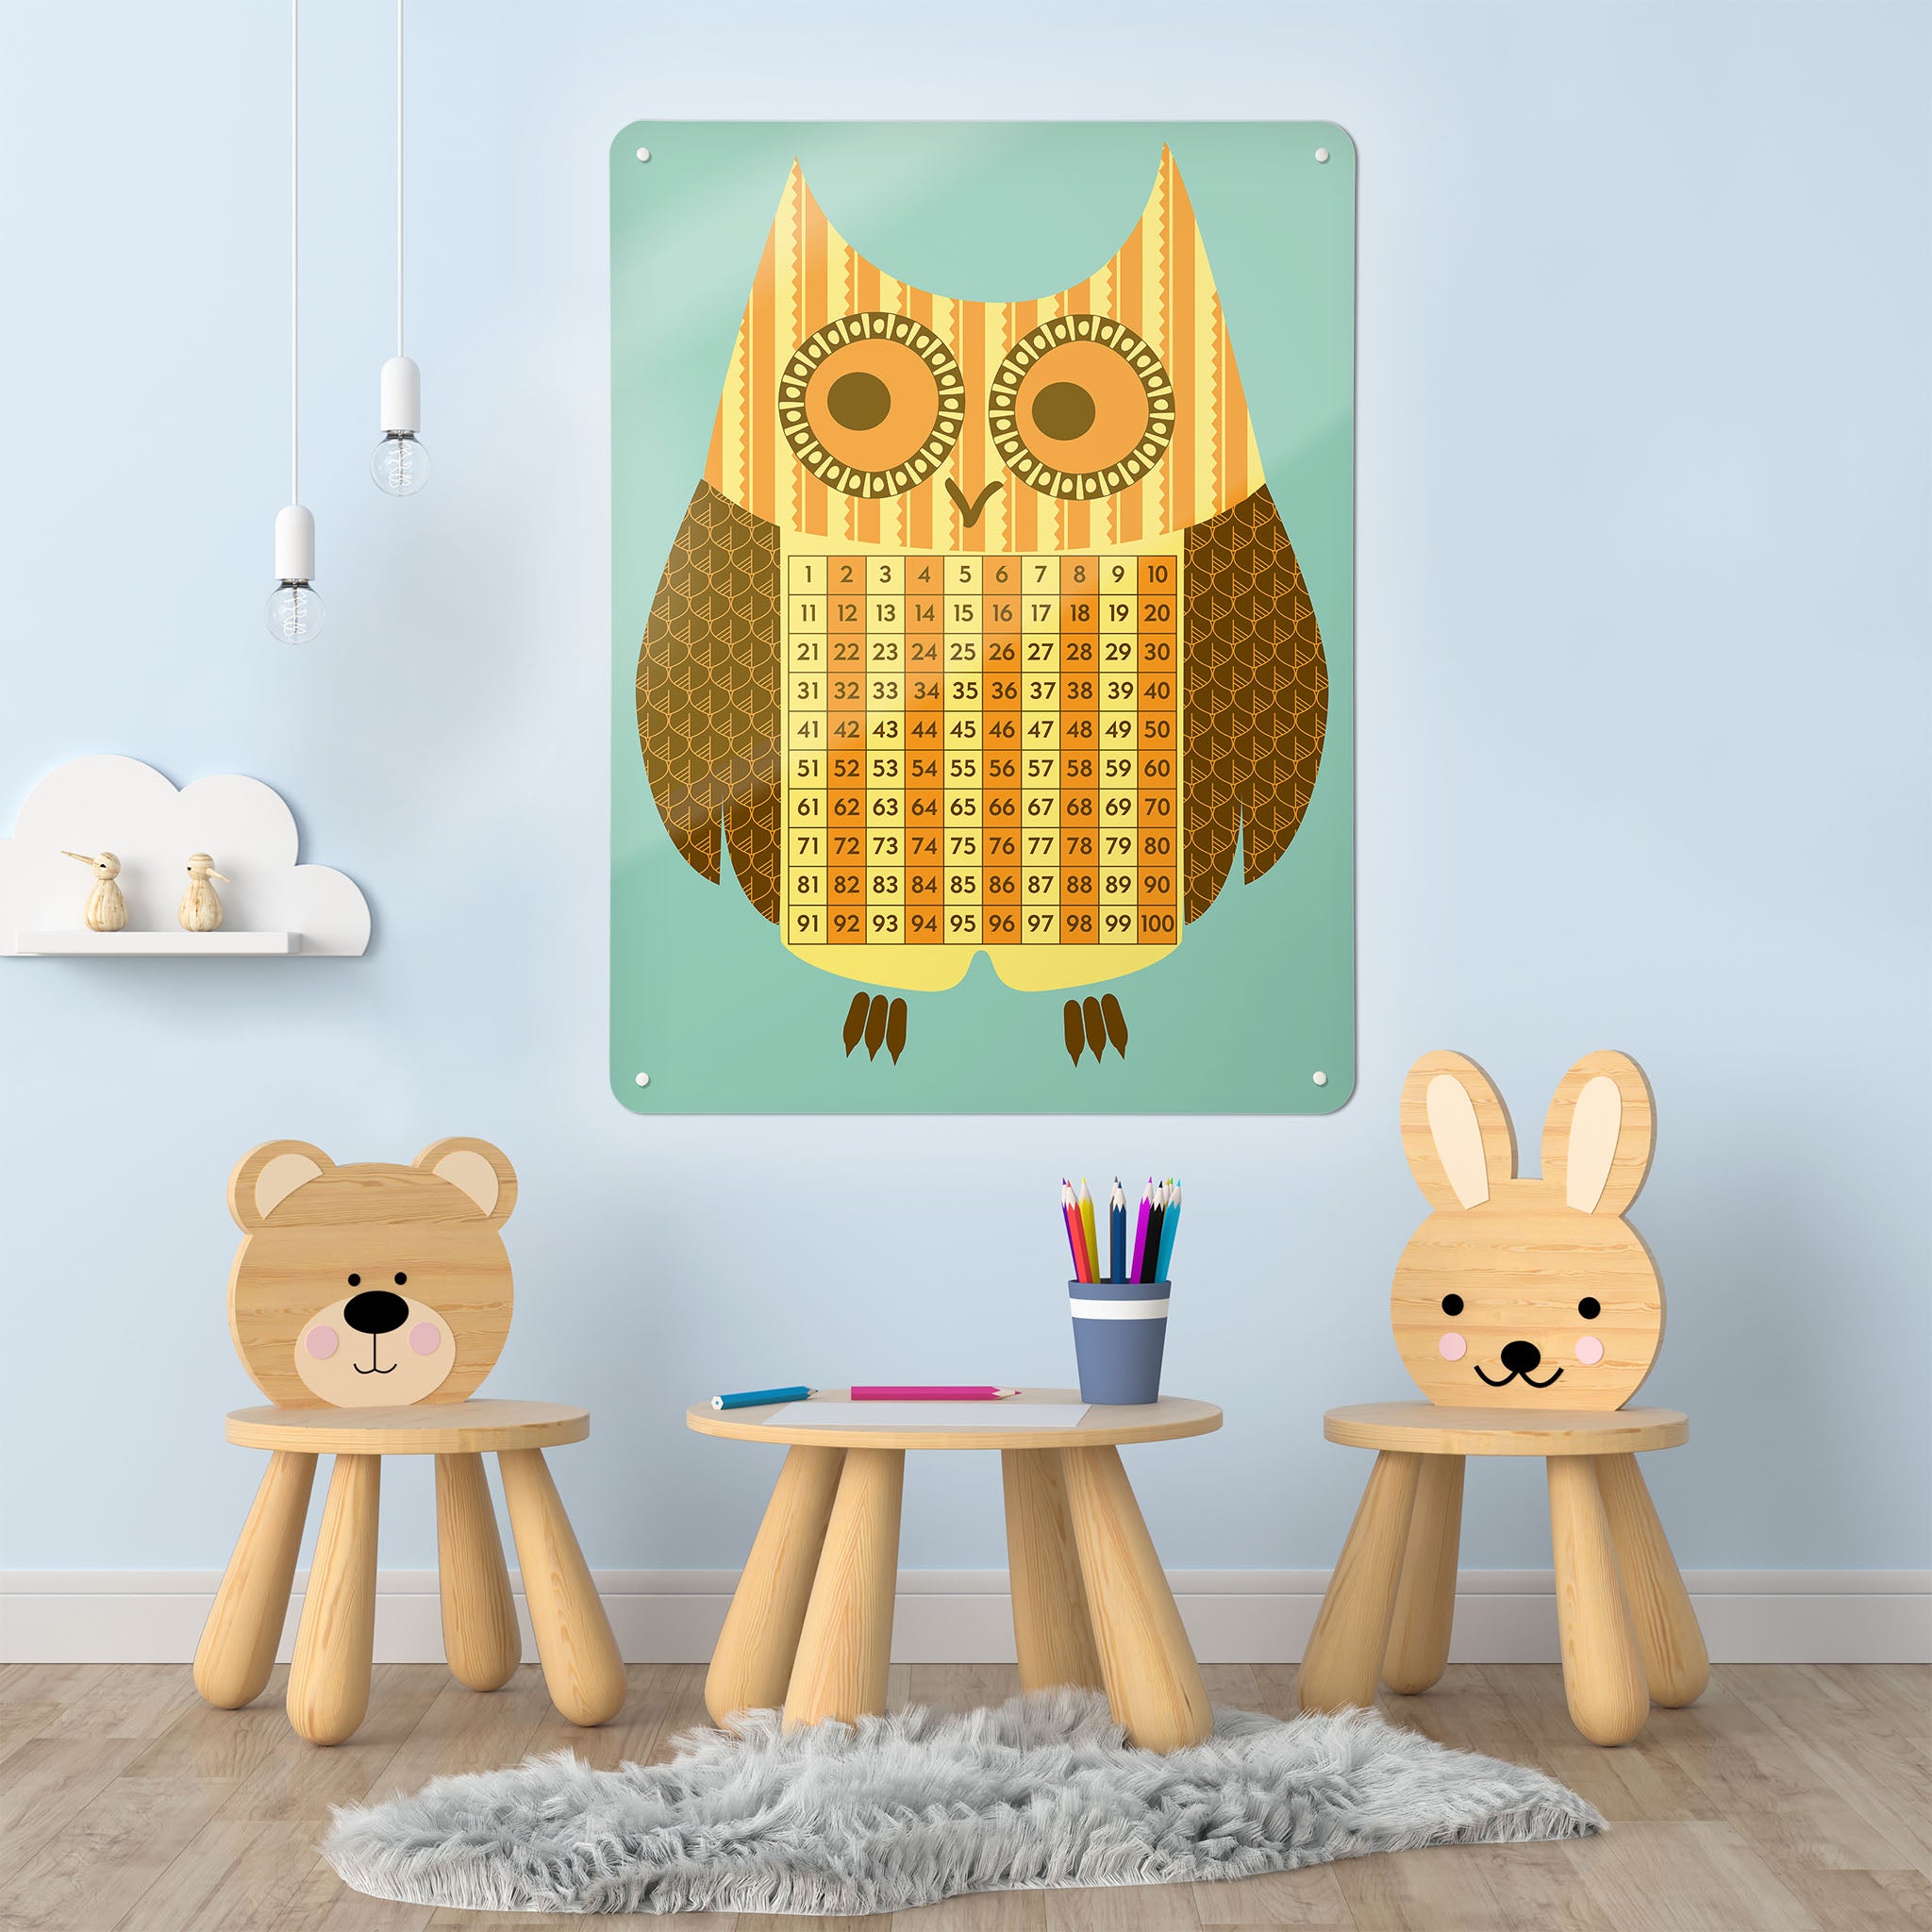 A playroom interior with a magnetic metal wall art panel showing an illustration of an owl with a number square design in blue and yellow